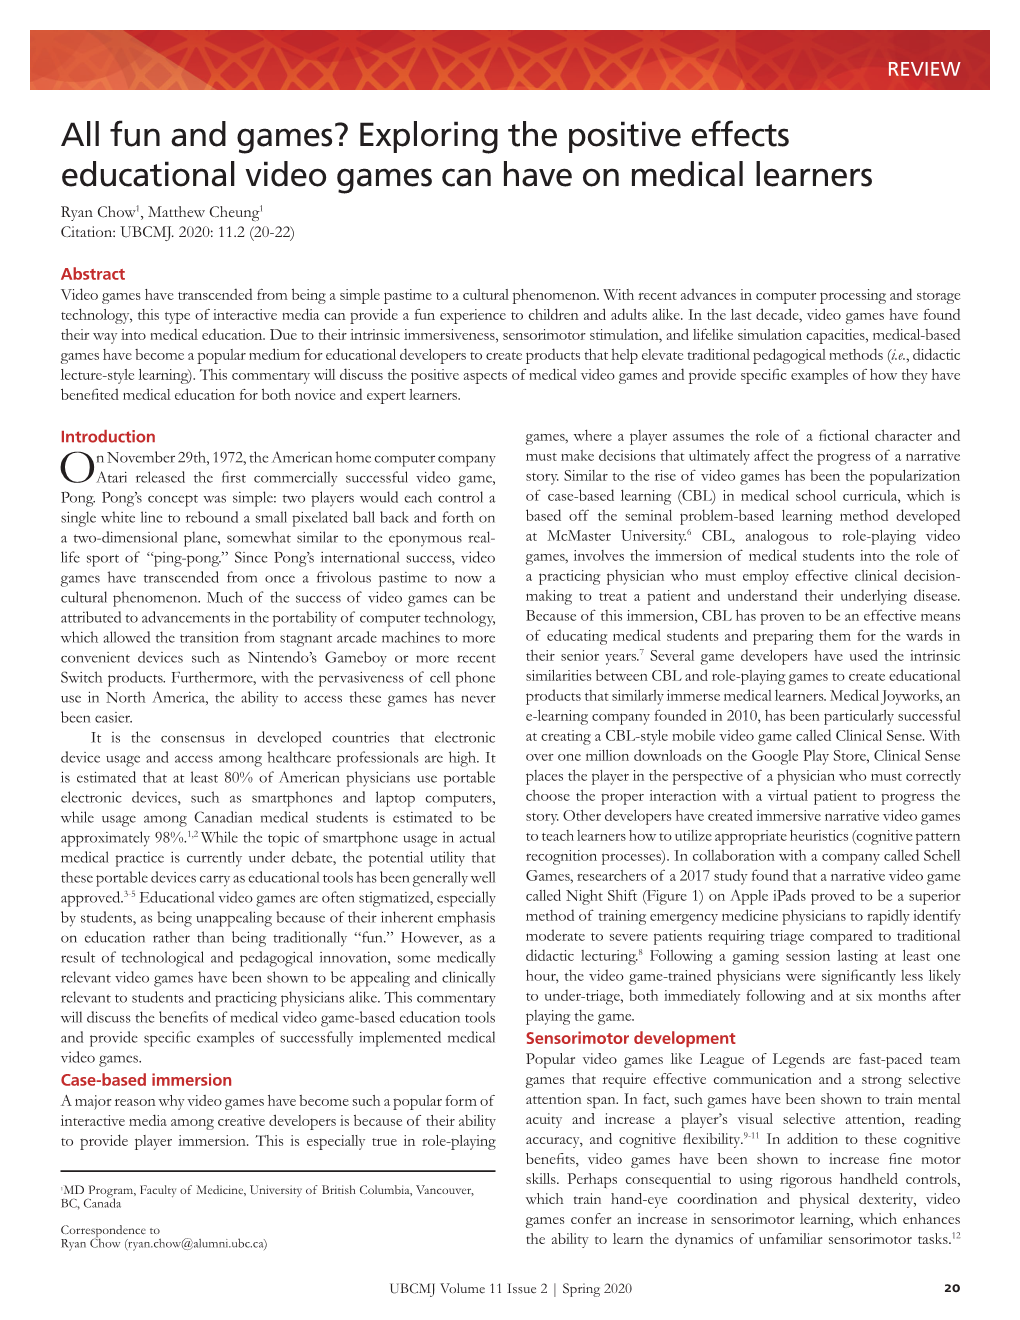 Exploring the Positive Effects Educational Video Games Can Have on Medical Learners Ryan Chow1, Matthew Cheung1 Citation: UBCMJ